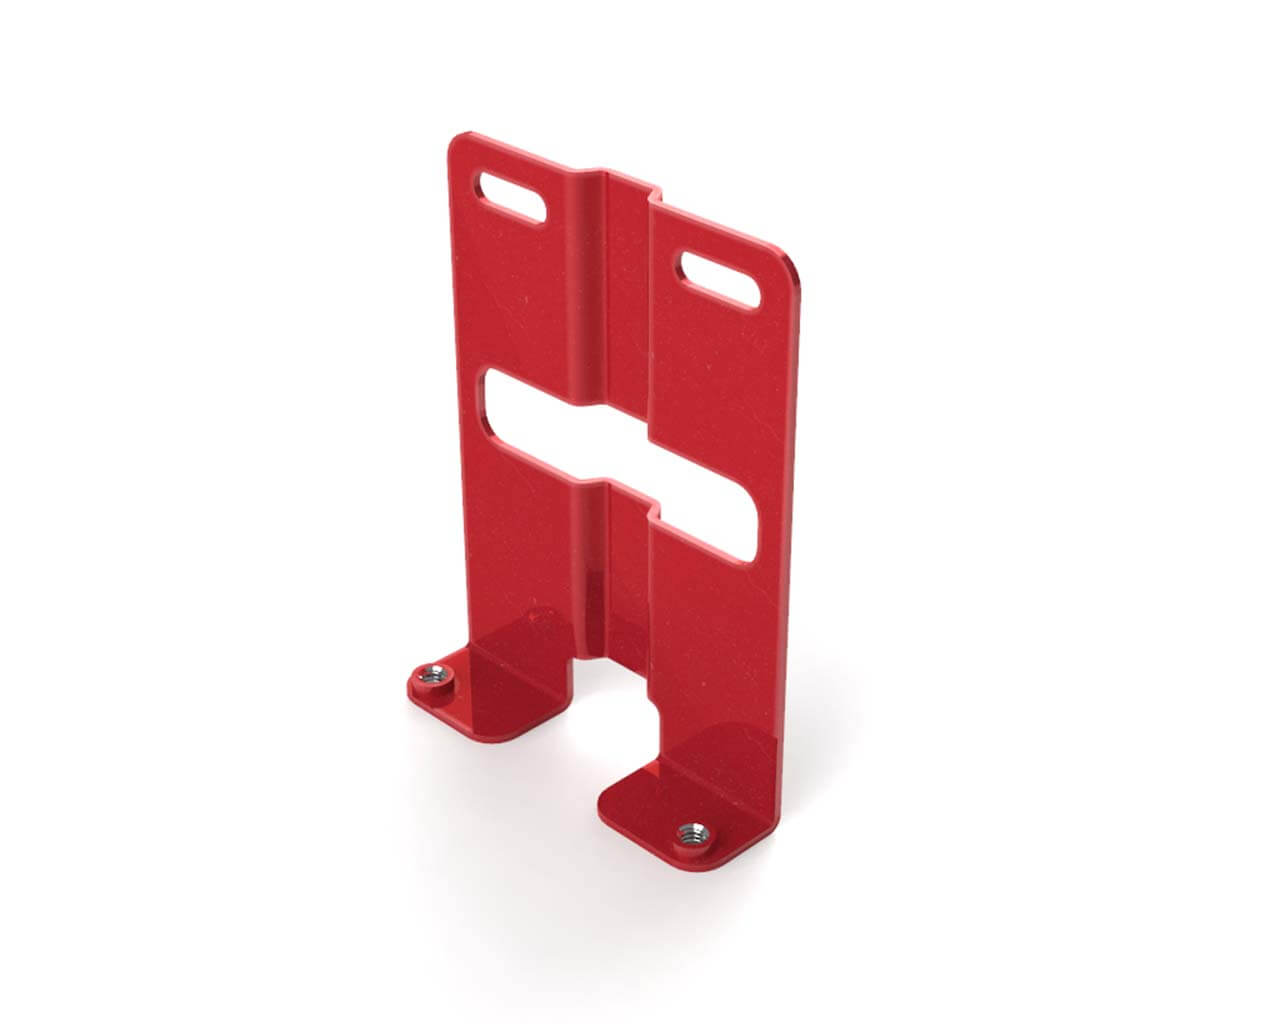 PrimoChill SX Upright CTR2 Mount Bracket - PrimoChill - KEEPING IT COOL Candy Red